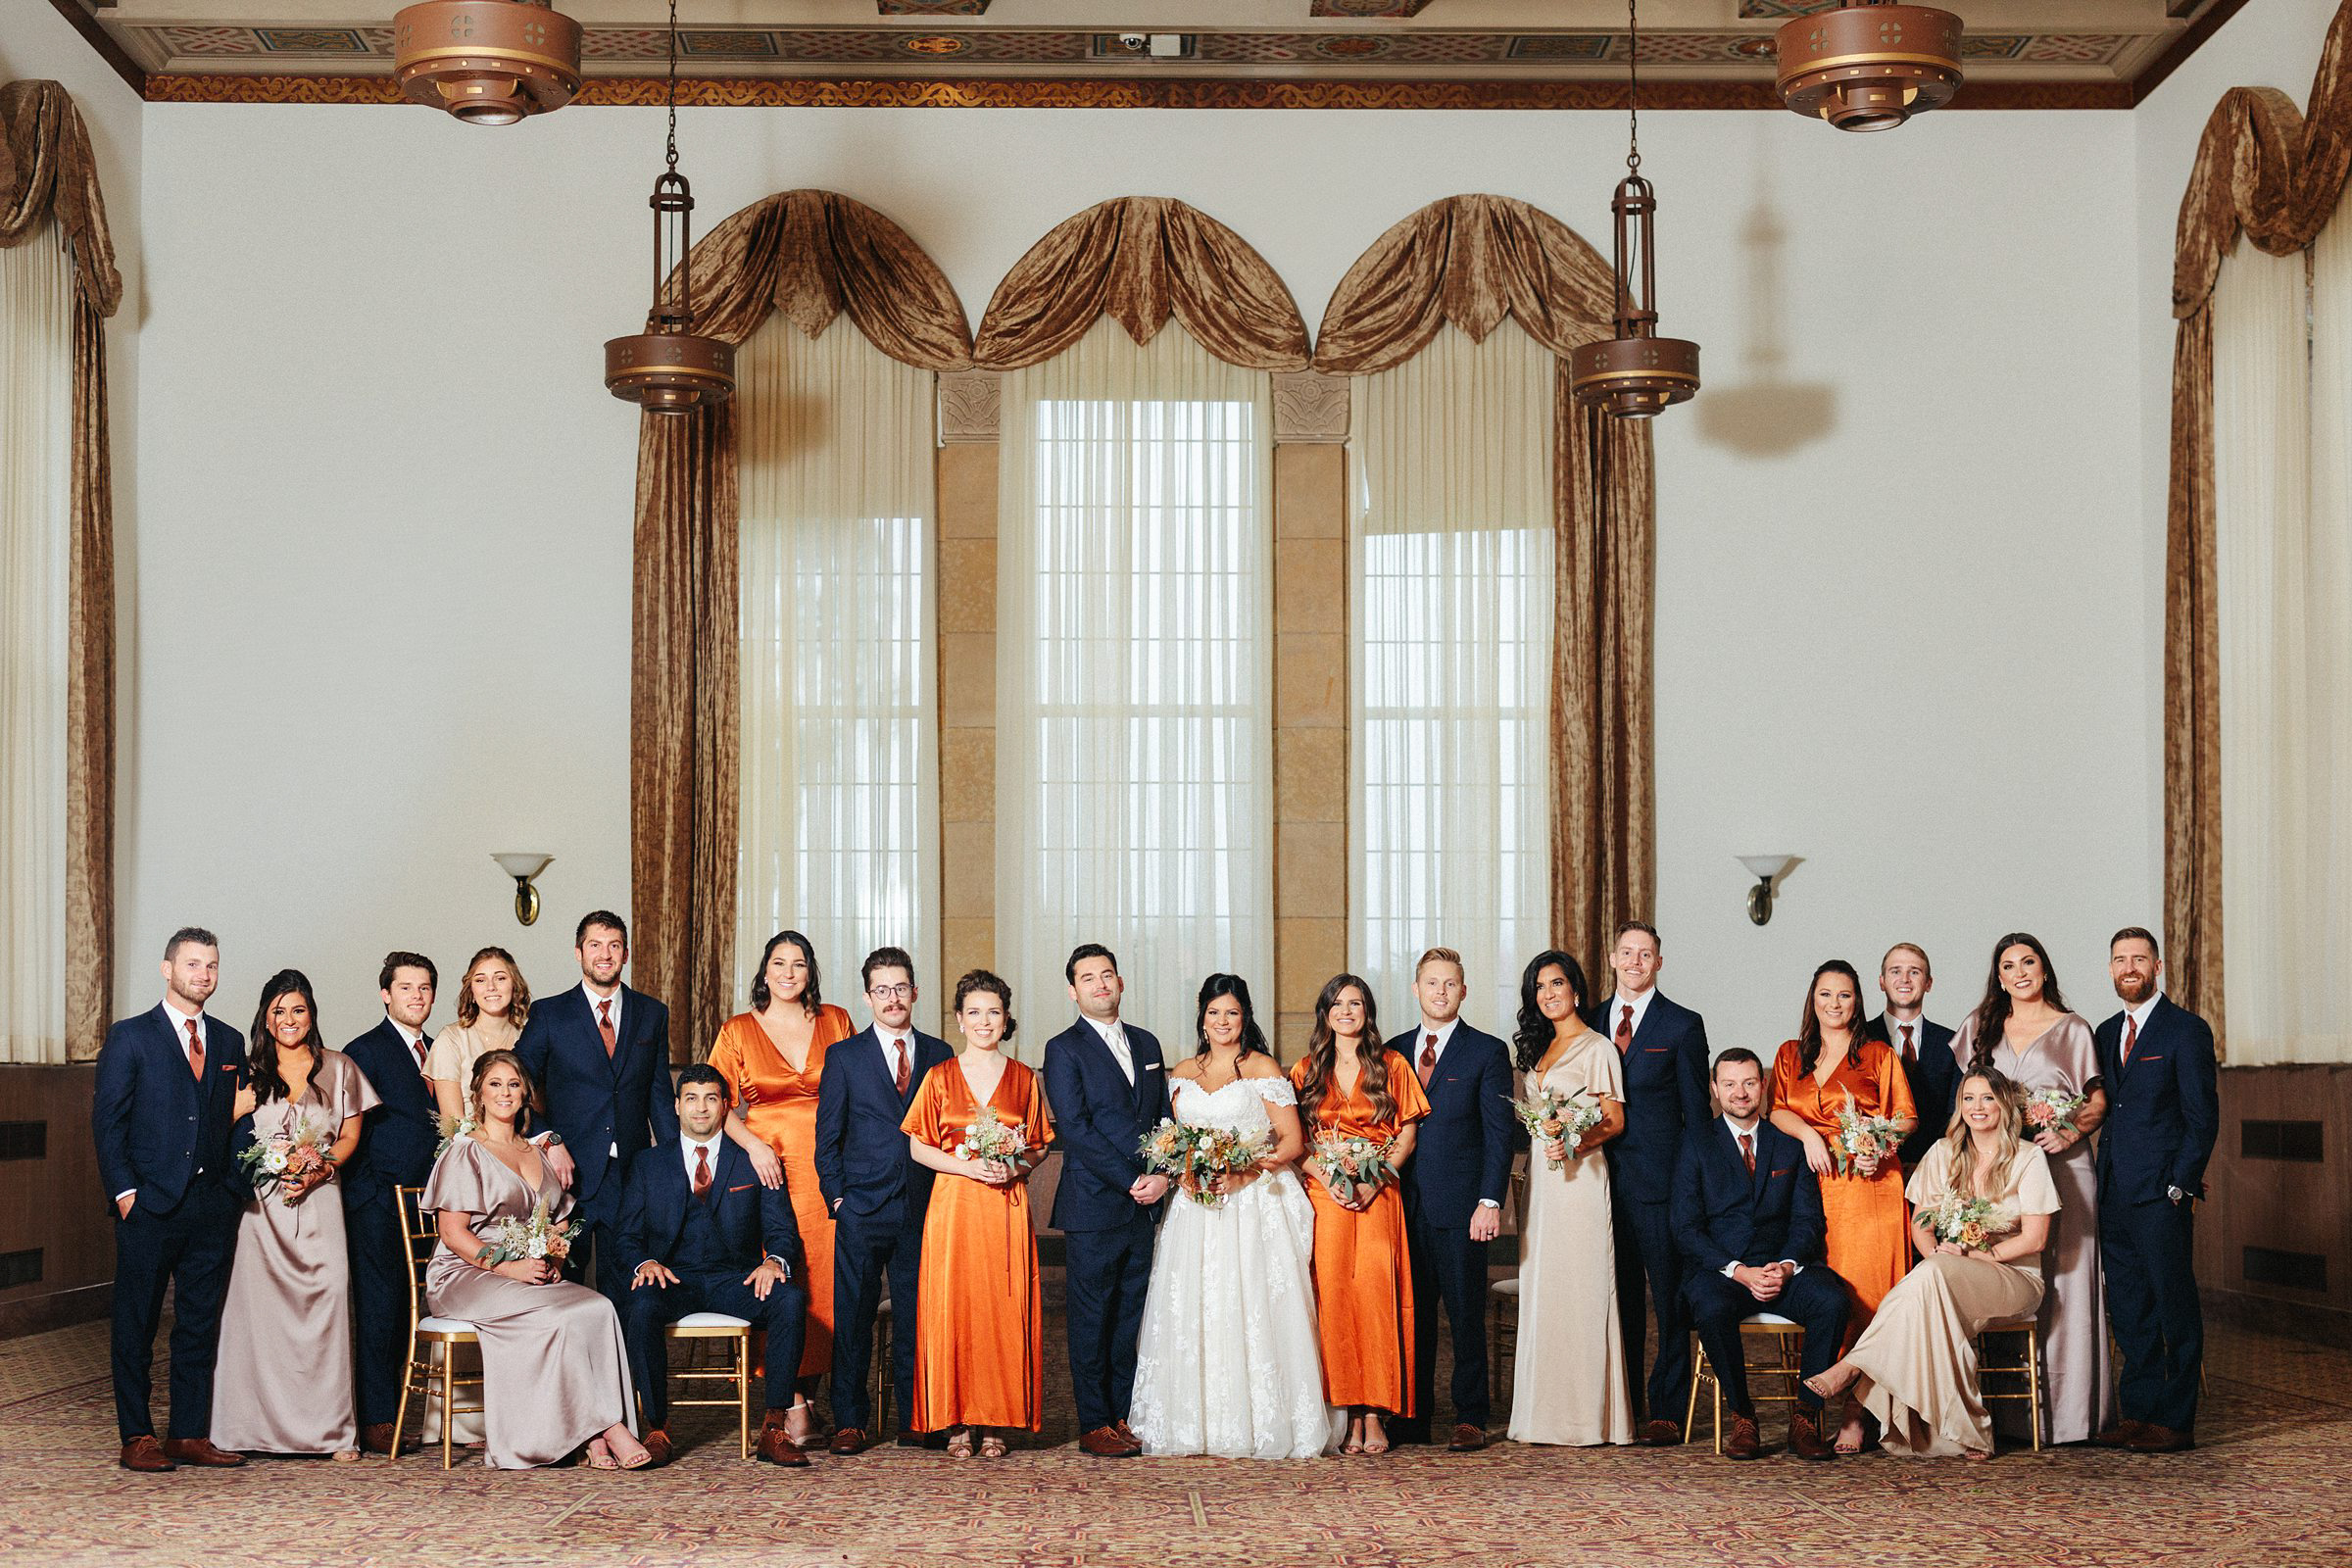 Wedding Party Picture at the Inn at St. Johns by Michele Maloney Photography